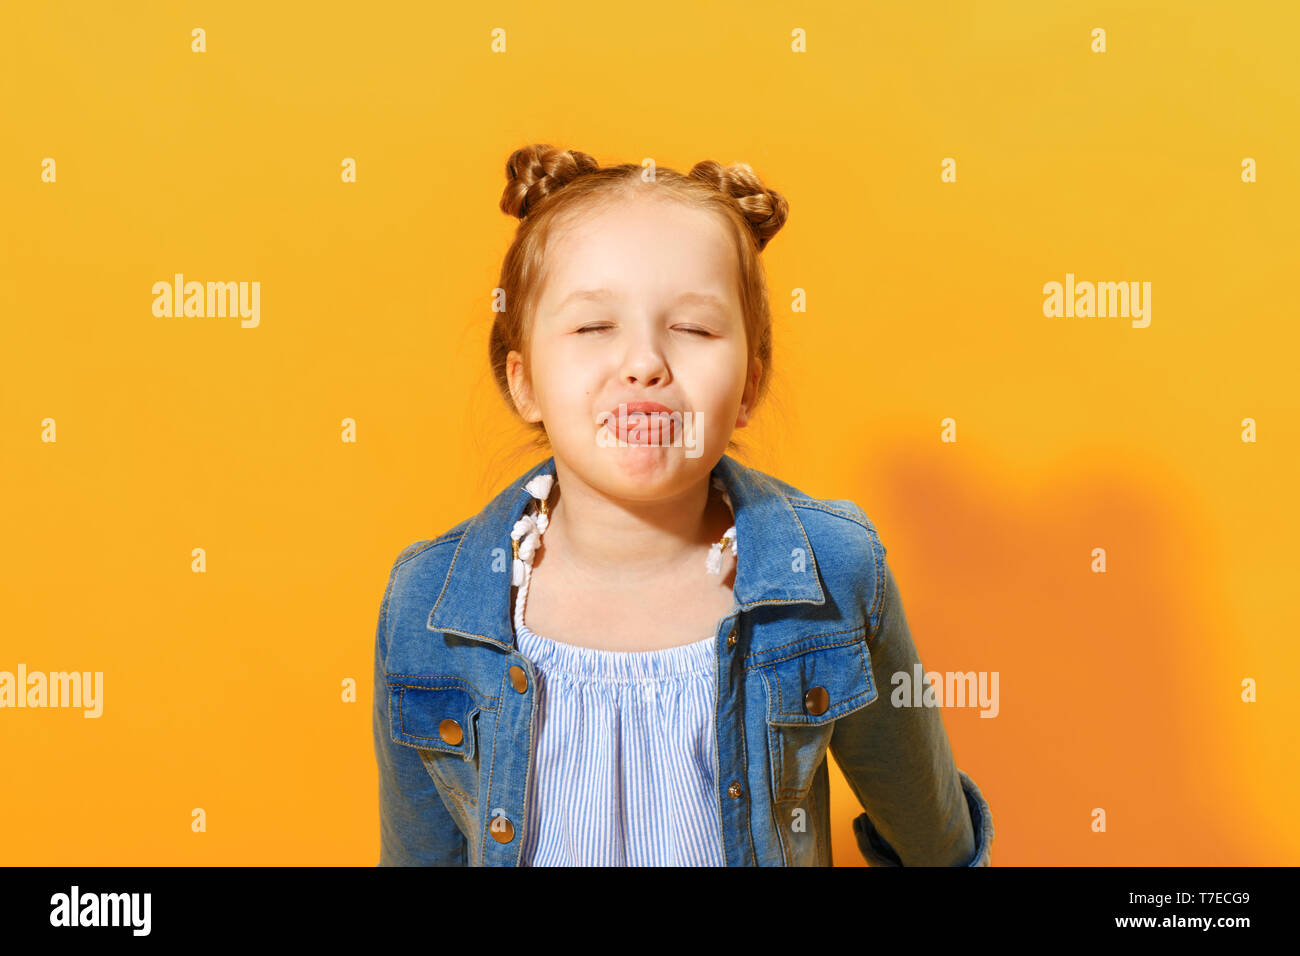 Cheerful little child girl closed her eyes and shows tongue. Yellow background, studio. Stock Photo